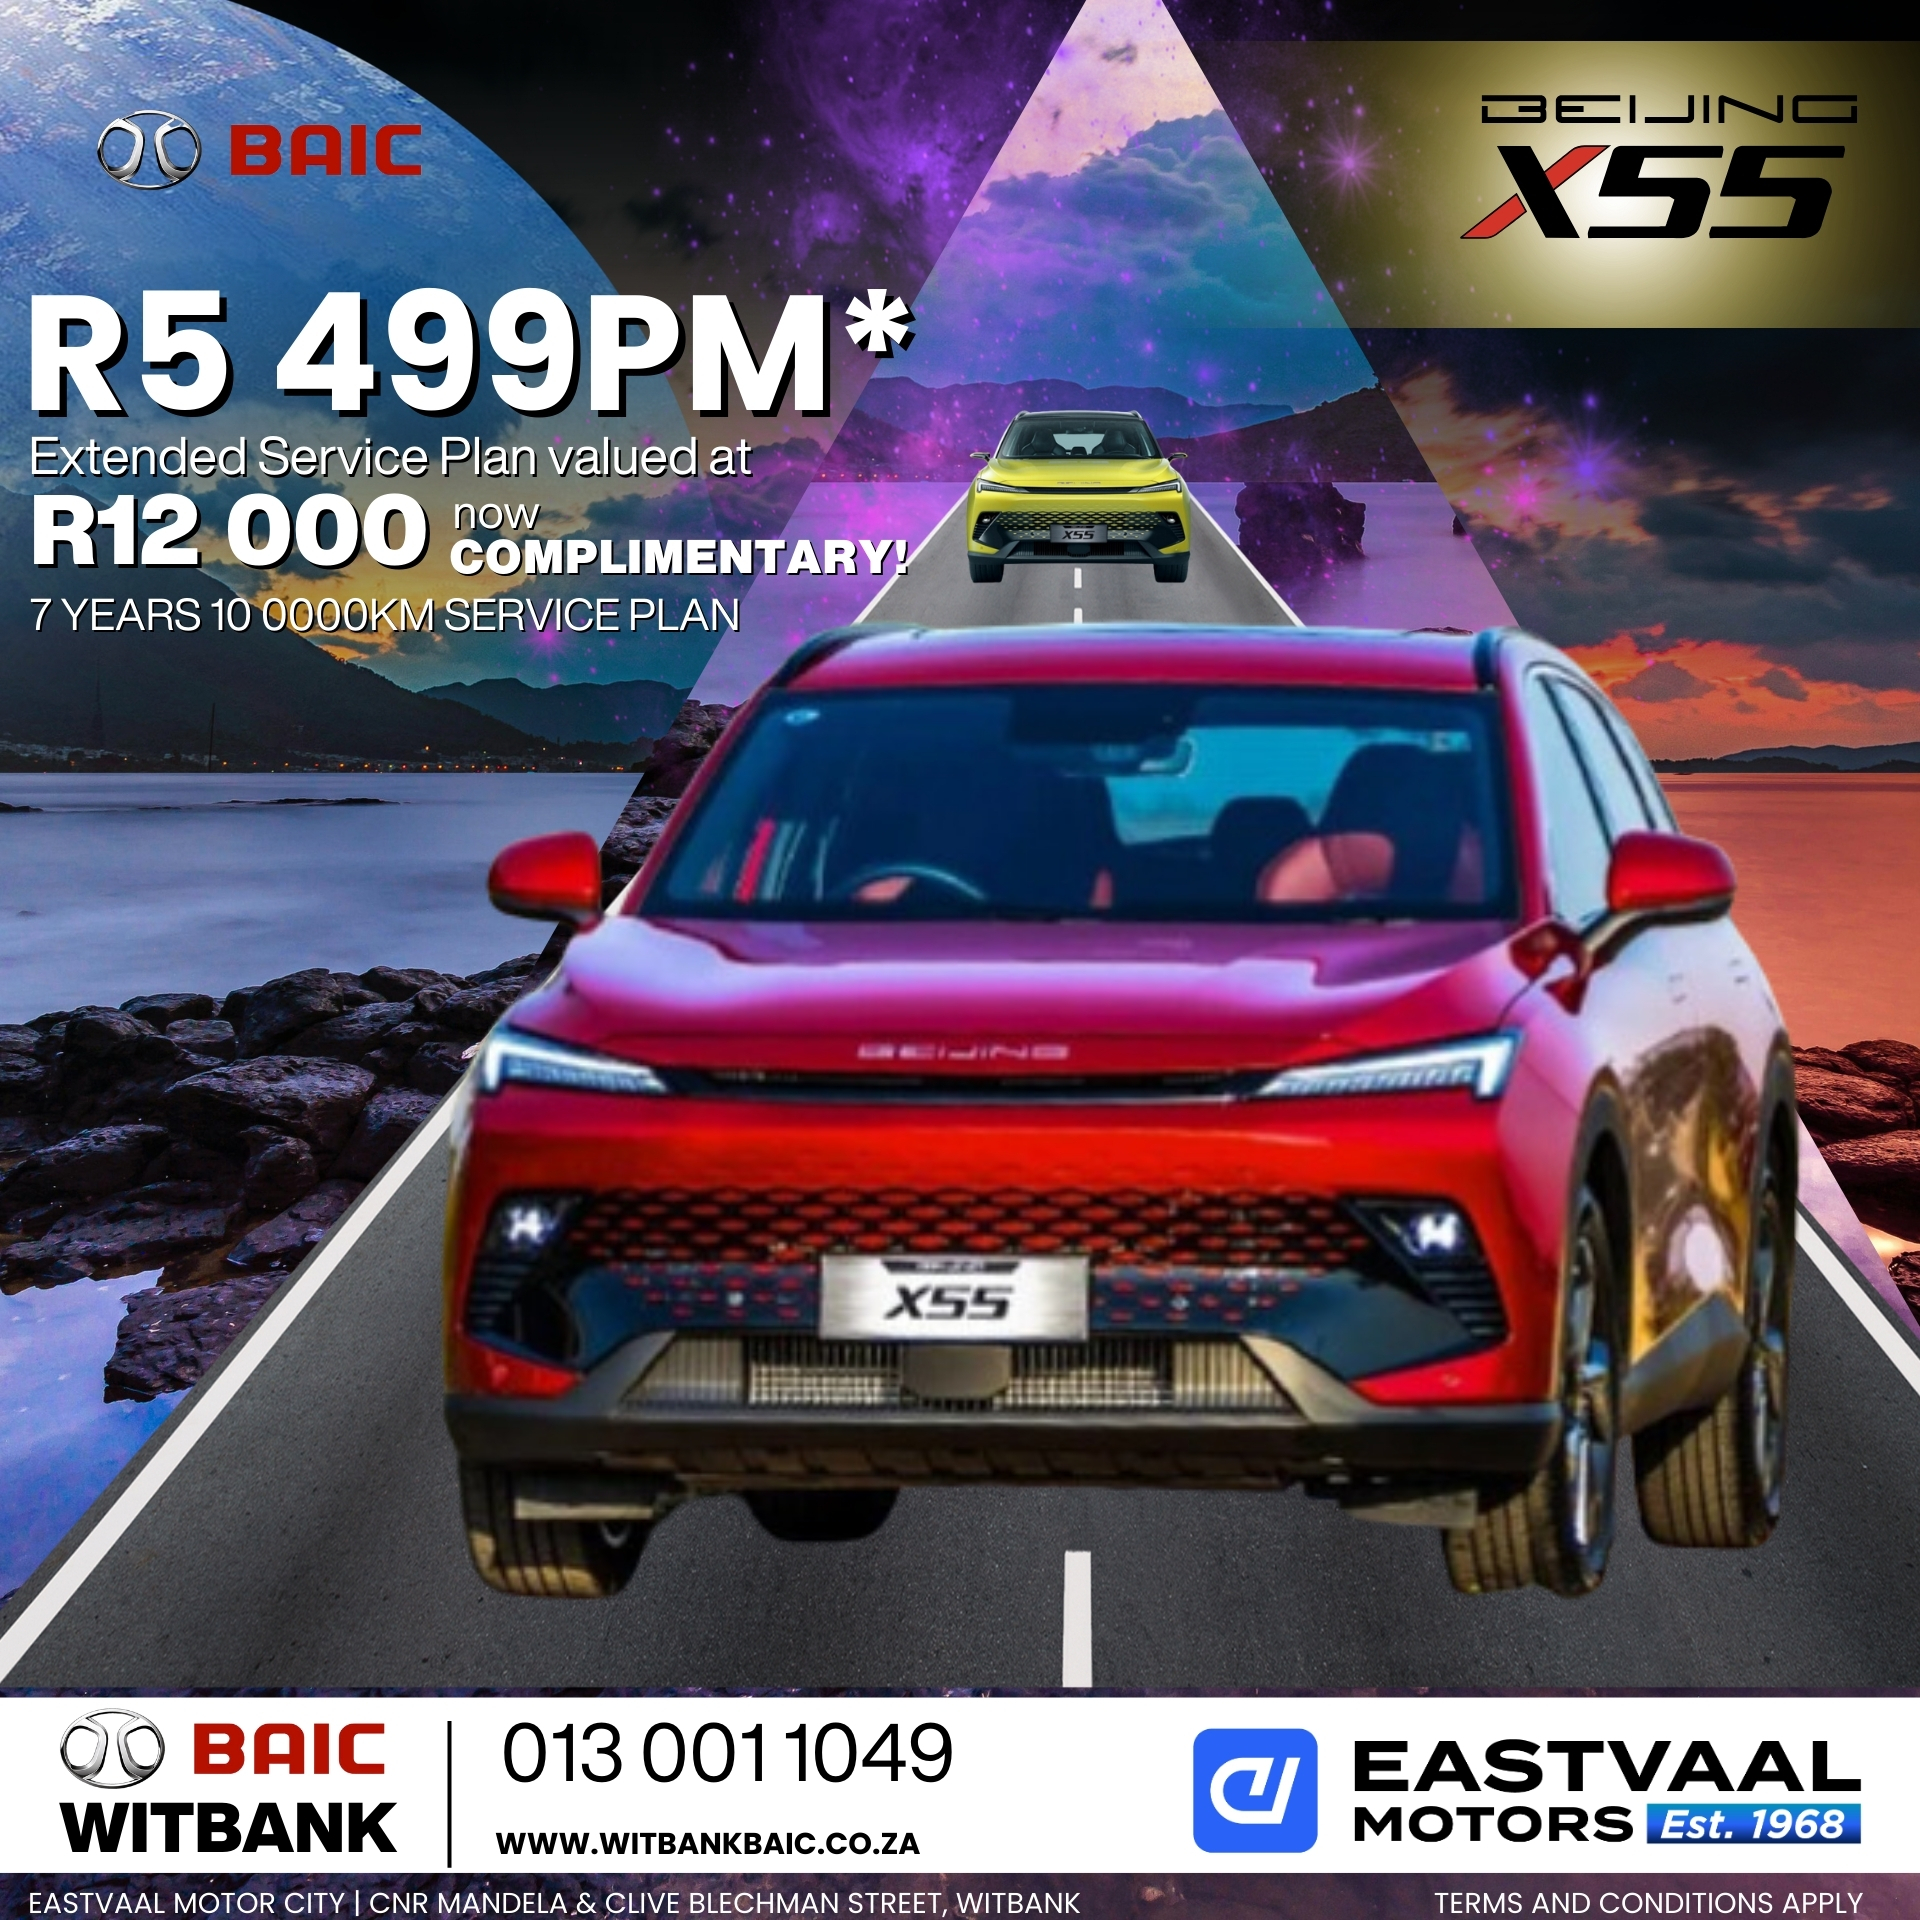 Unleash the power of BAIC this July. Visit us at Eastvaal Motor City for exclusive offers! image from 